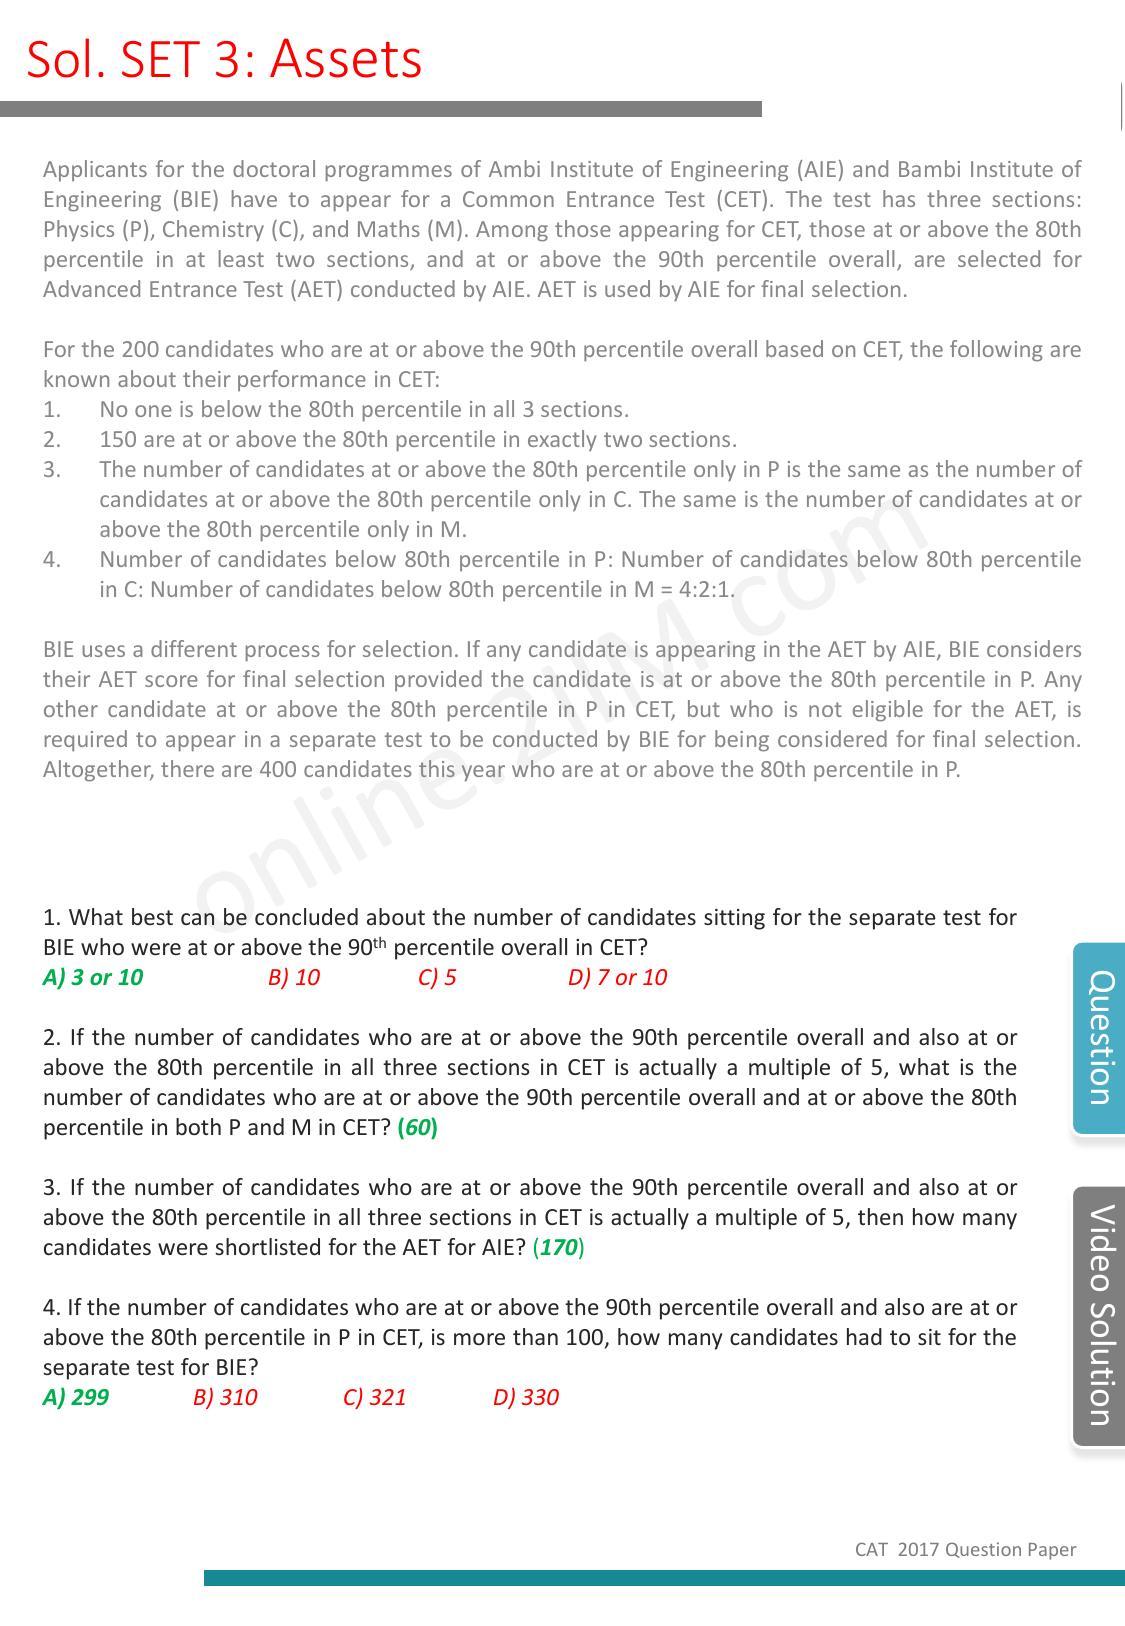 CAT 2017 CAT DILR Slot 1 Question Paper - Page 12